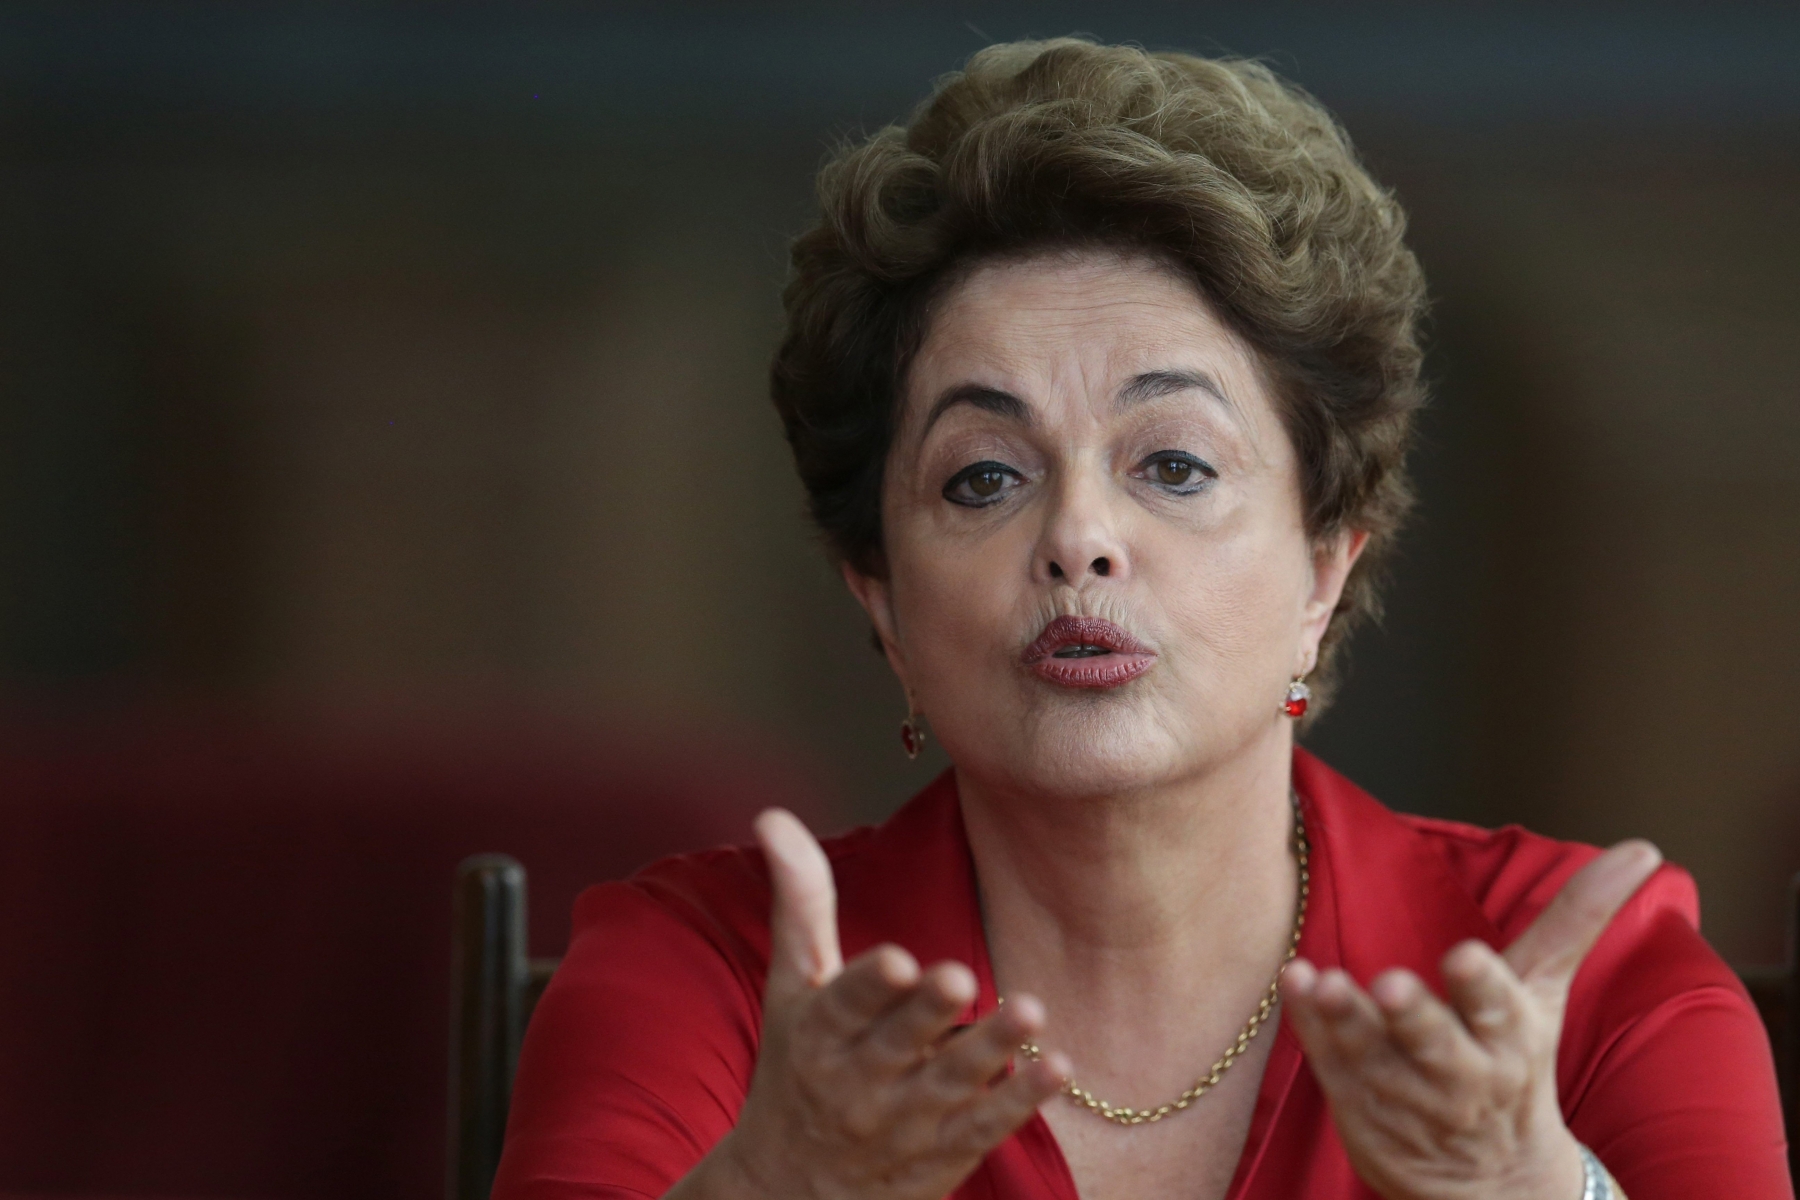 In this Thursday, Aug. 18, 2016 photo, Brazil's suspended President Dilma Rousseff speaks on the process of impeachment during a press conference for foreign correspondents, at the official residence Alvorada Palace, in Brasilia, Brazil. Rousseff made a last-ditch effort Tuesday to avoid impeachment, telling Brazilian lawmakers she would let voters decide if they want an early presidential election if she is restored to power. (AP Photo/Eraldo Peres) Week That In Was In Latin America Photo Gallery